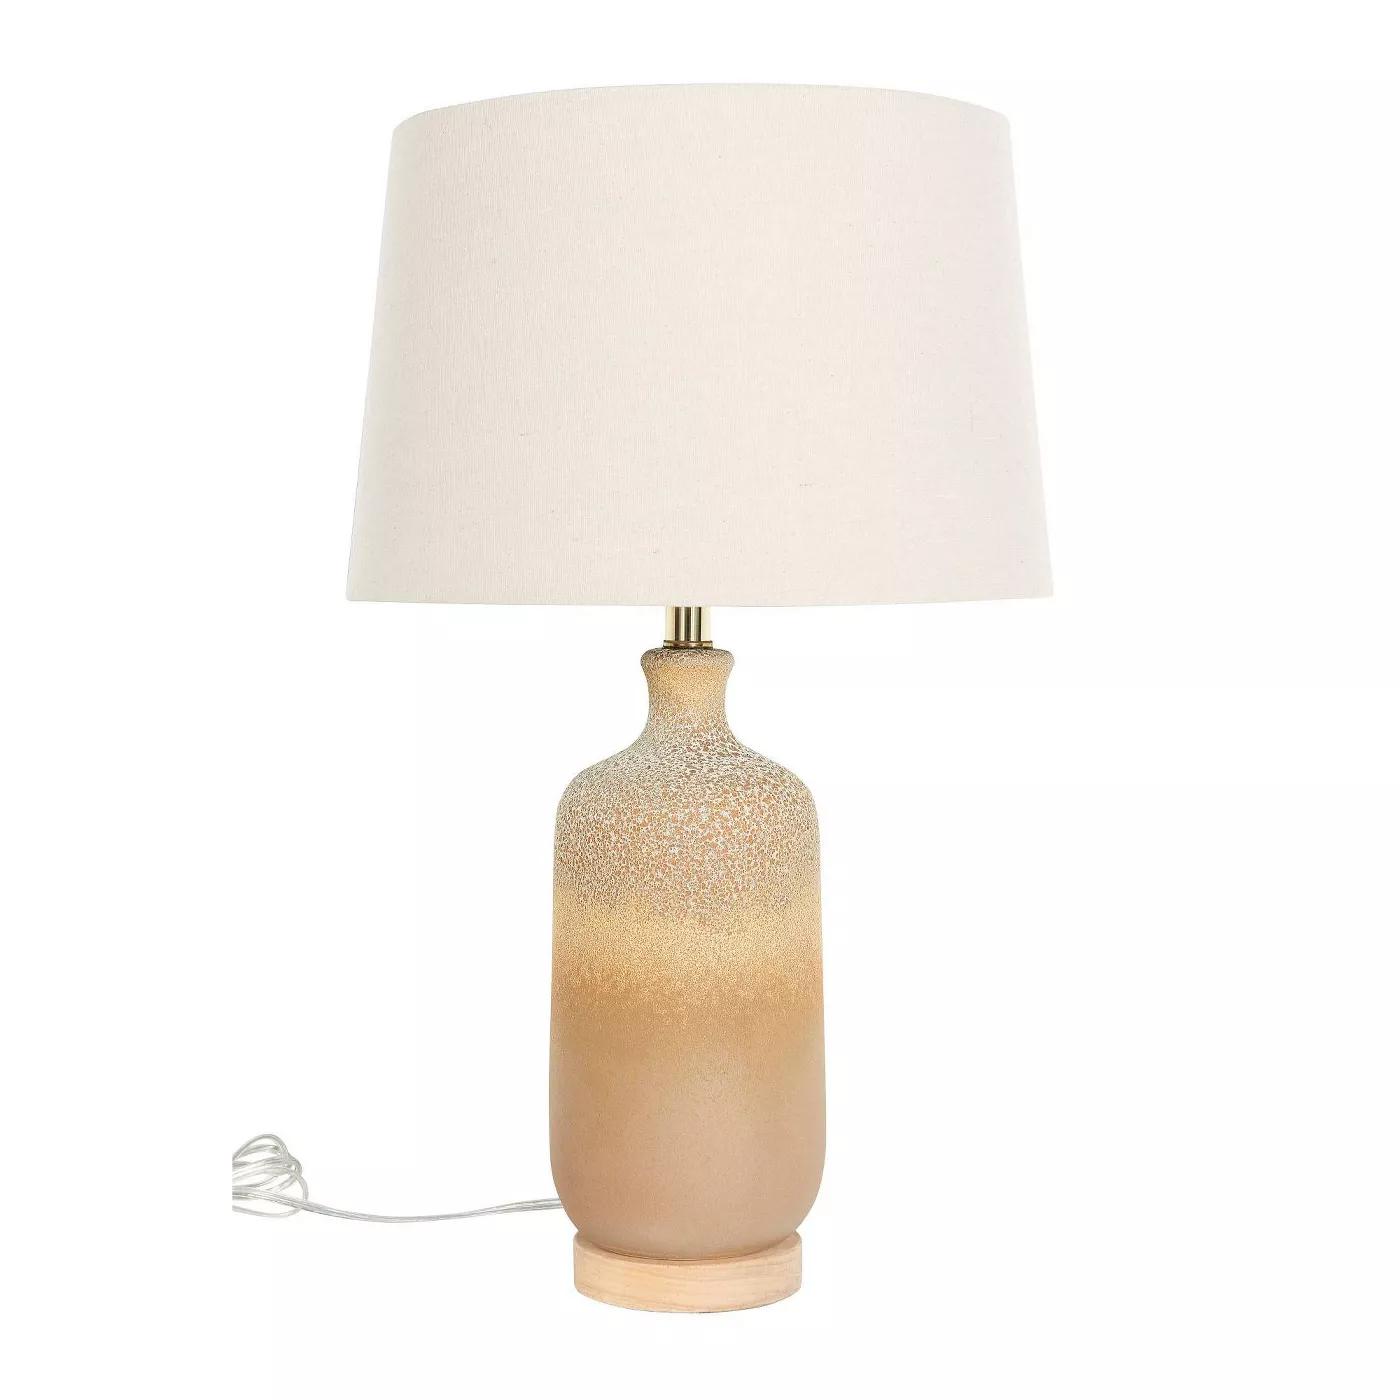 Boyes Lamp - Cove Goods | Havenly